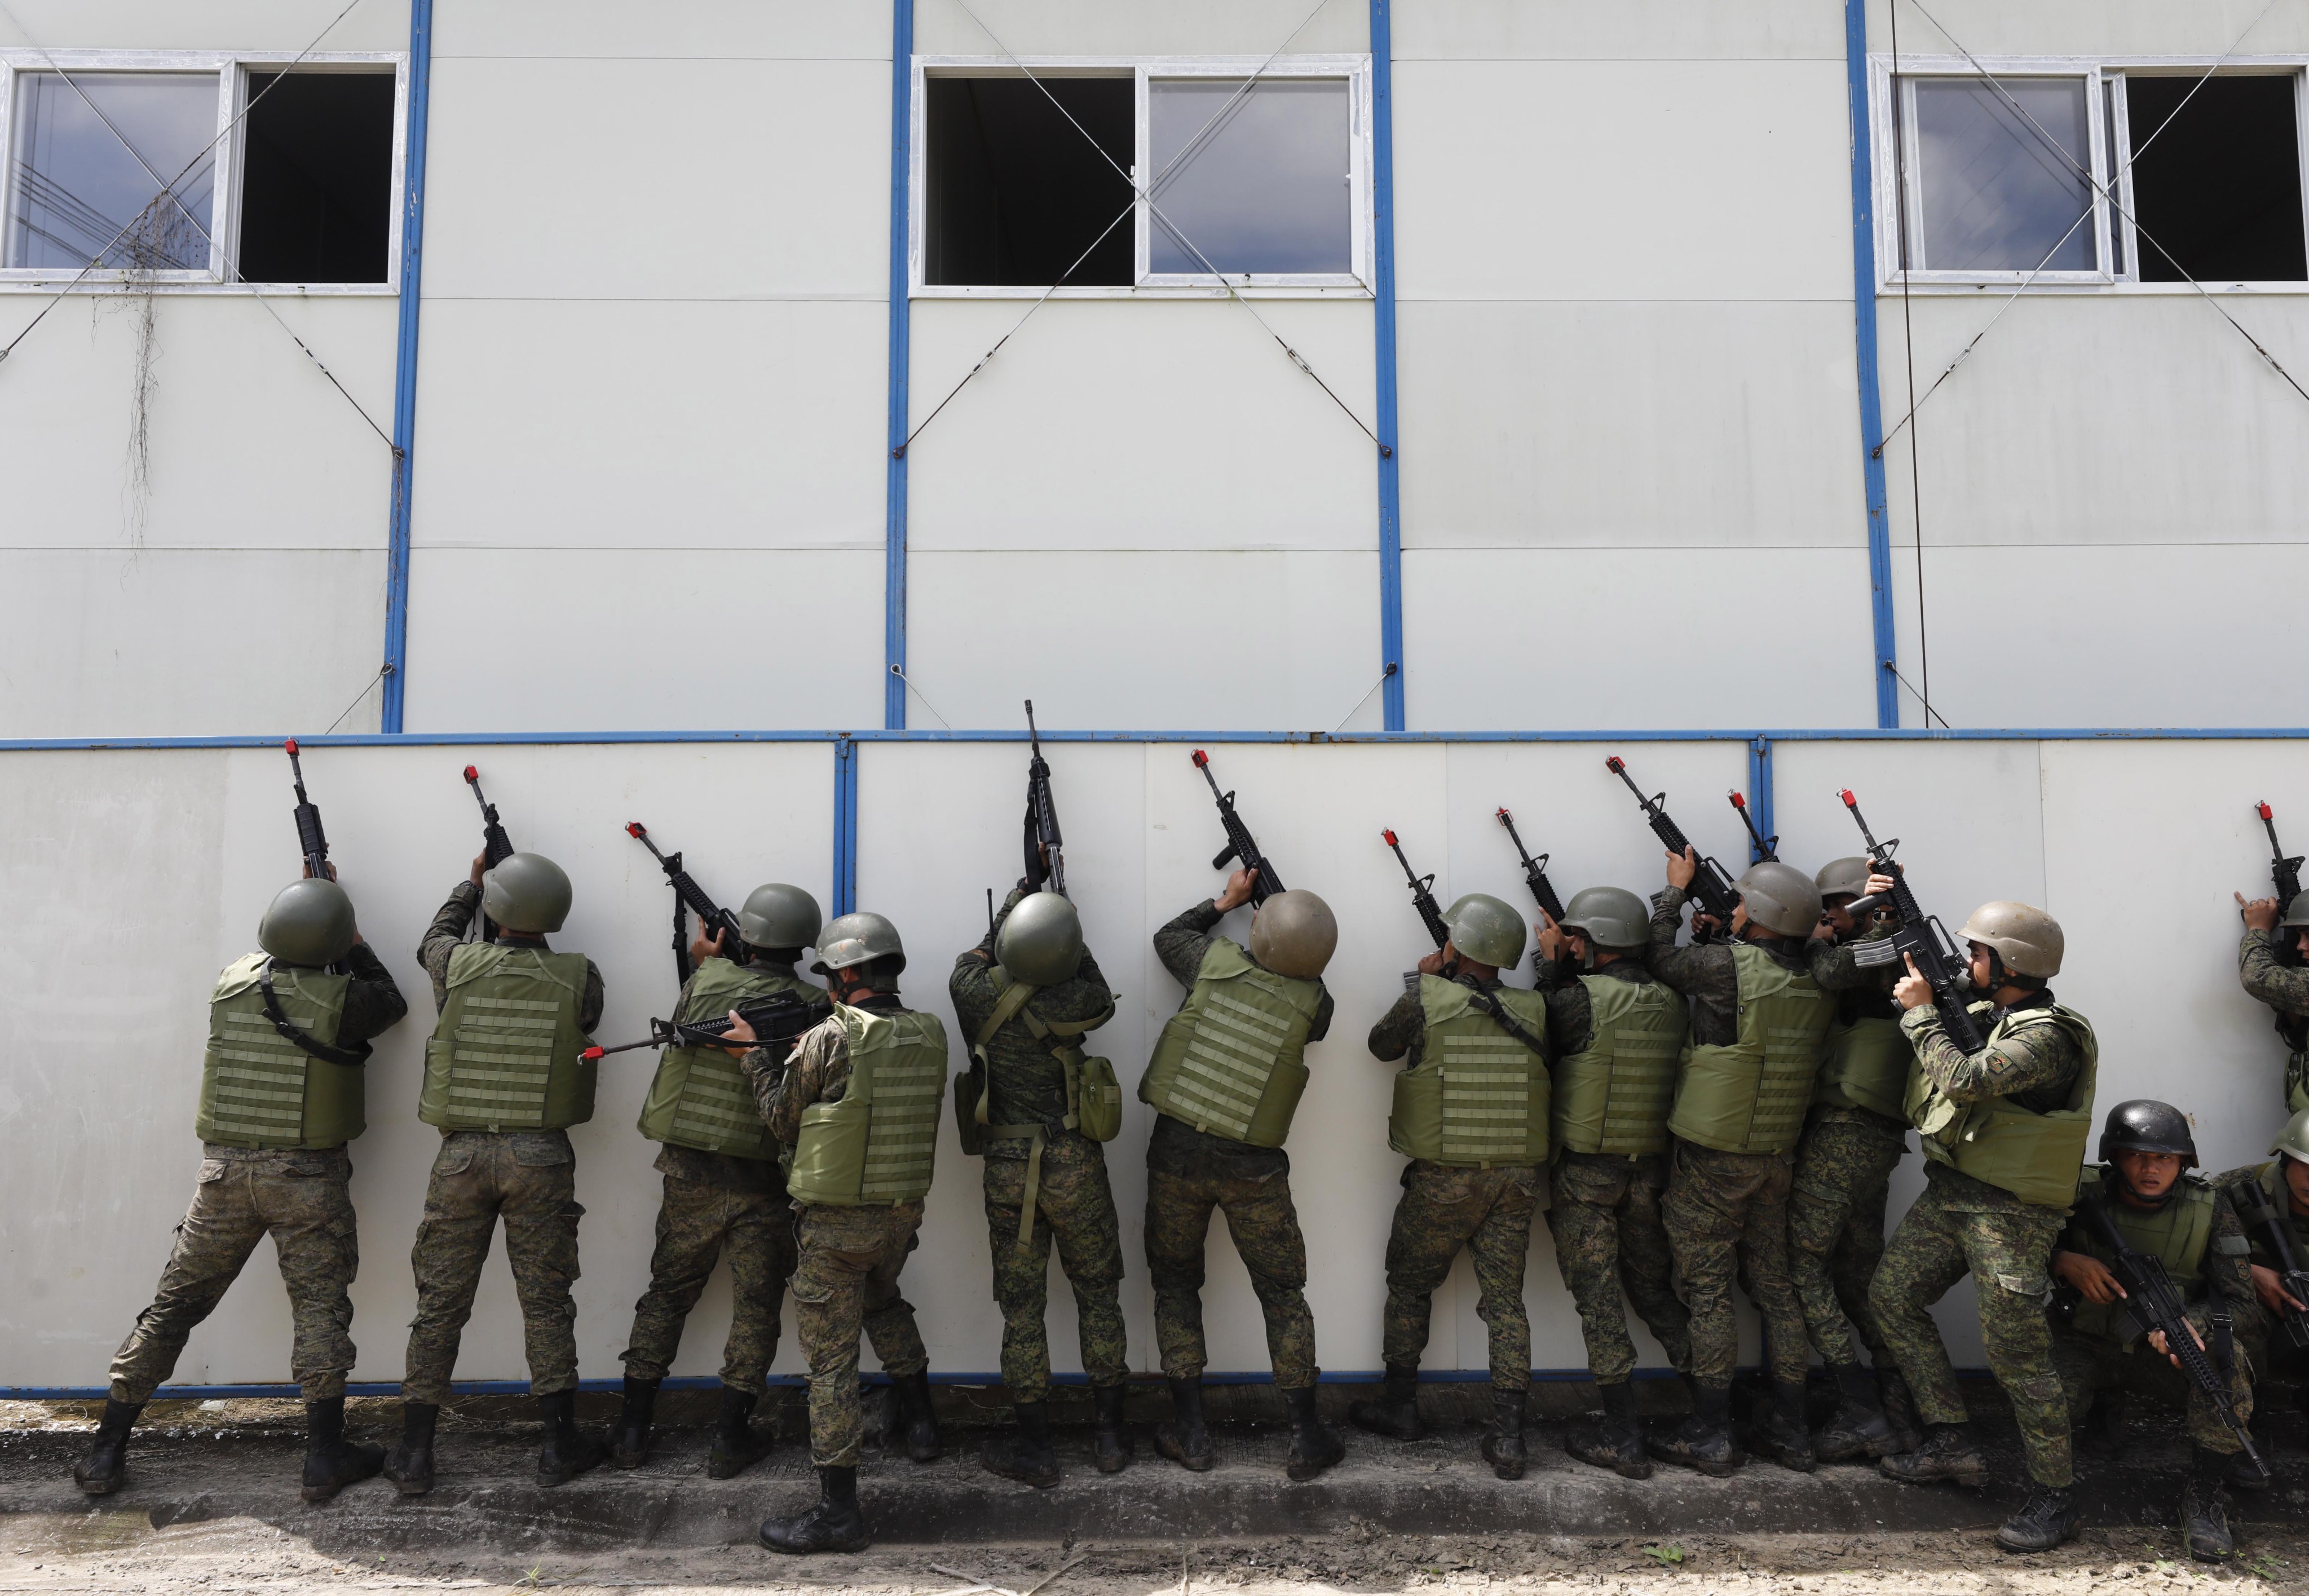 Soldiers of the Armed Forces of the Philippines take cover beside a wall during an assault exercise at Fort Magsaysay military camp in Nueva Ecija province, north of Manila. File photo: EPA-EFE